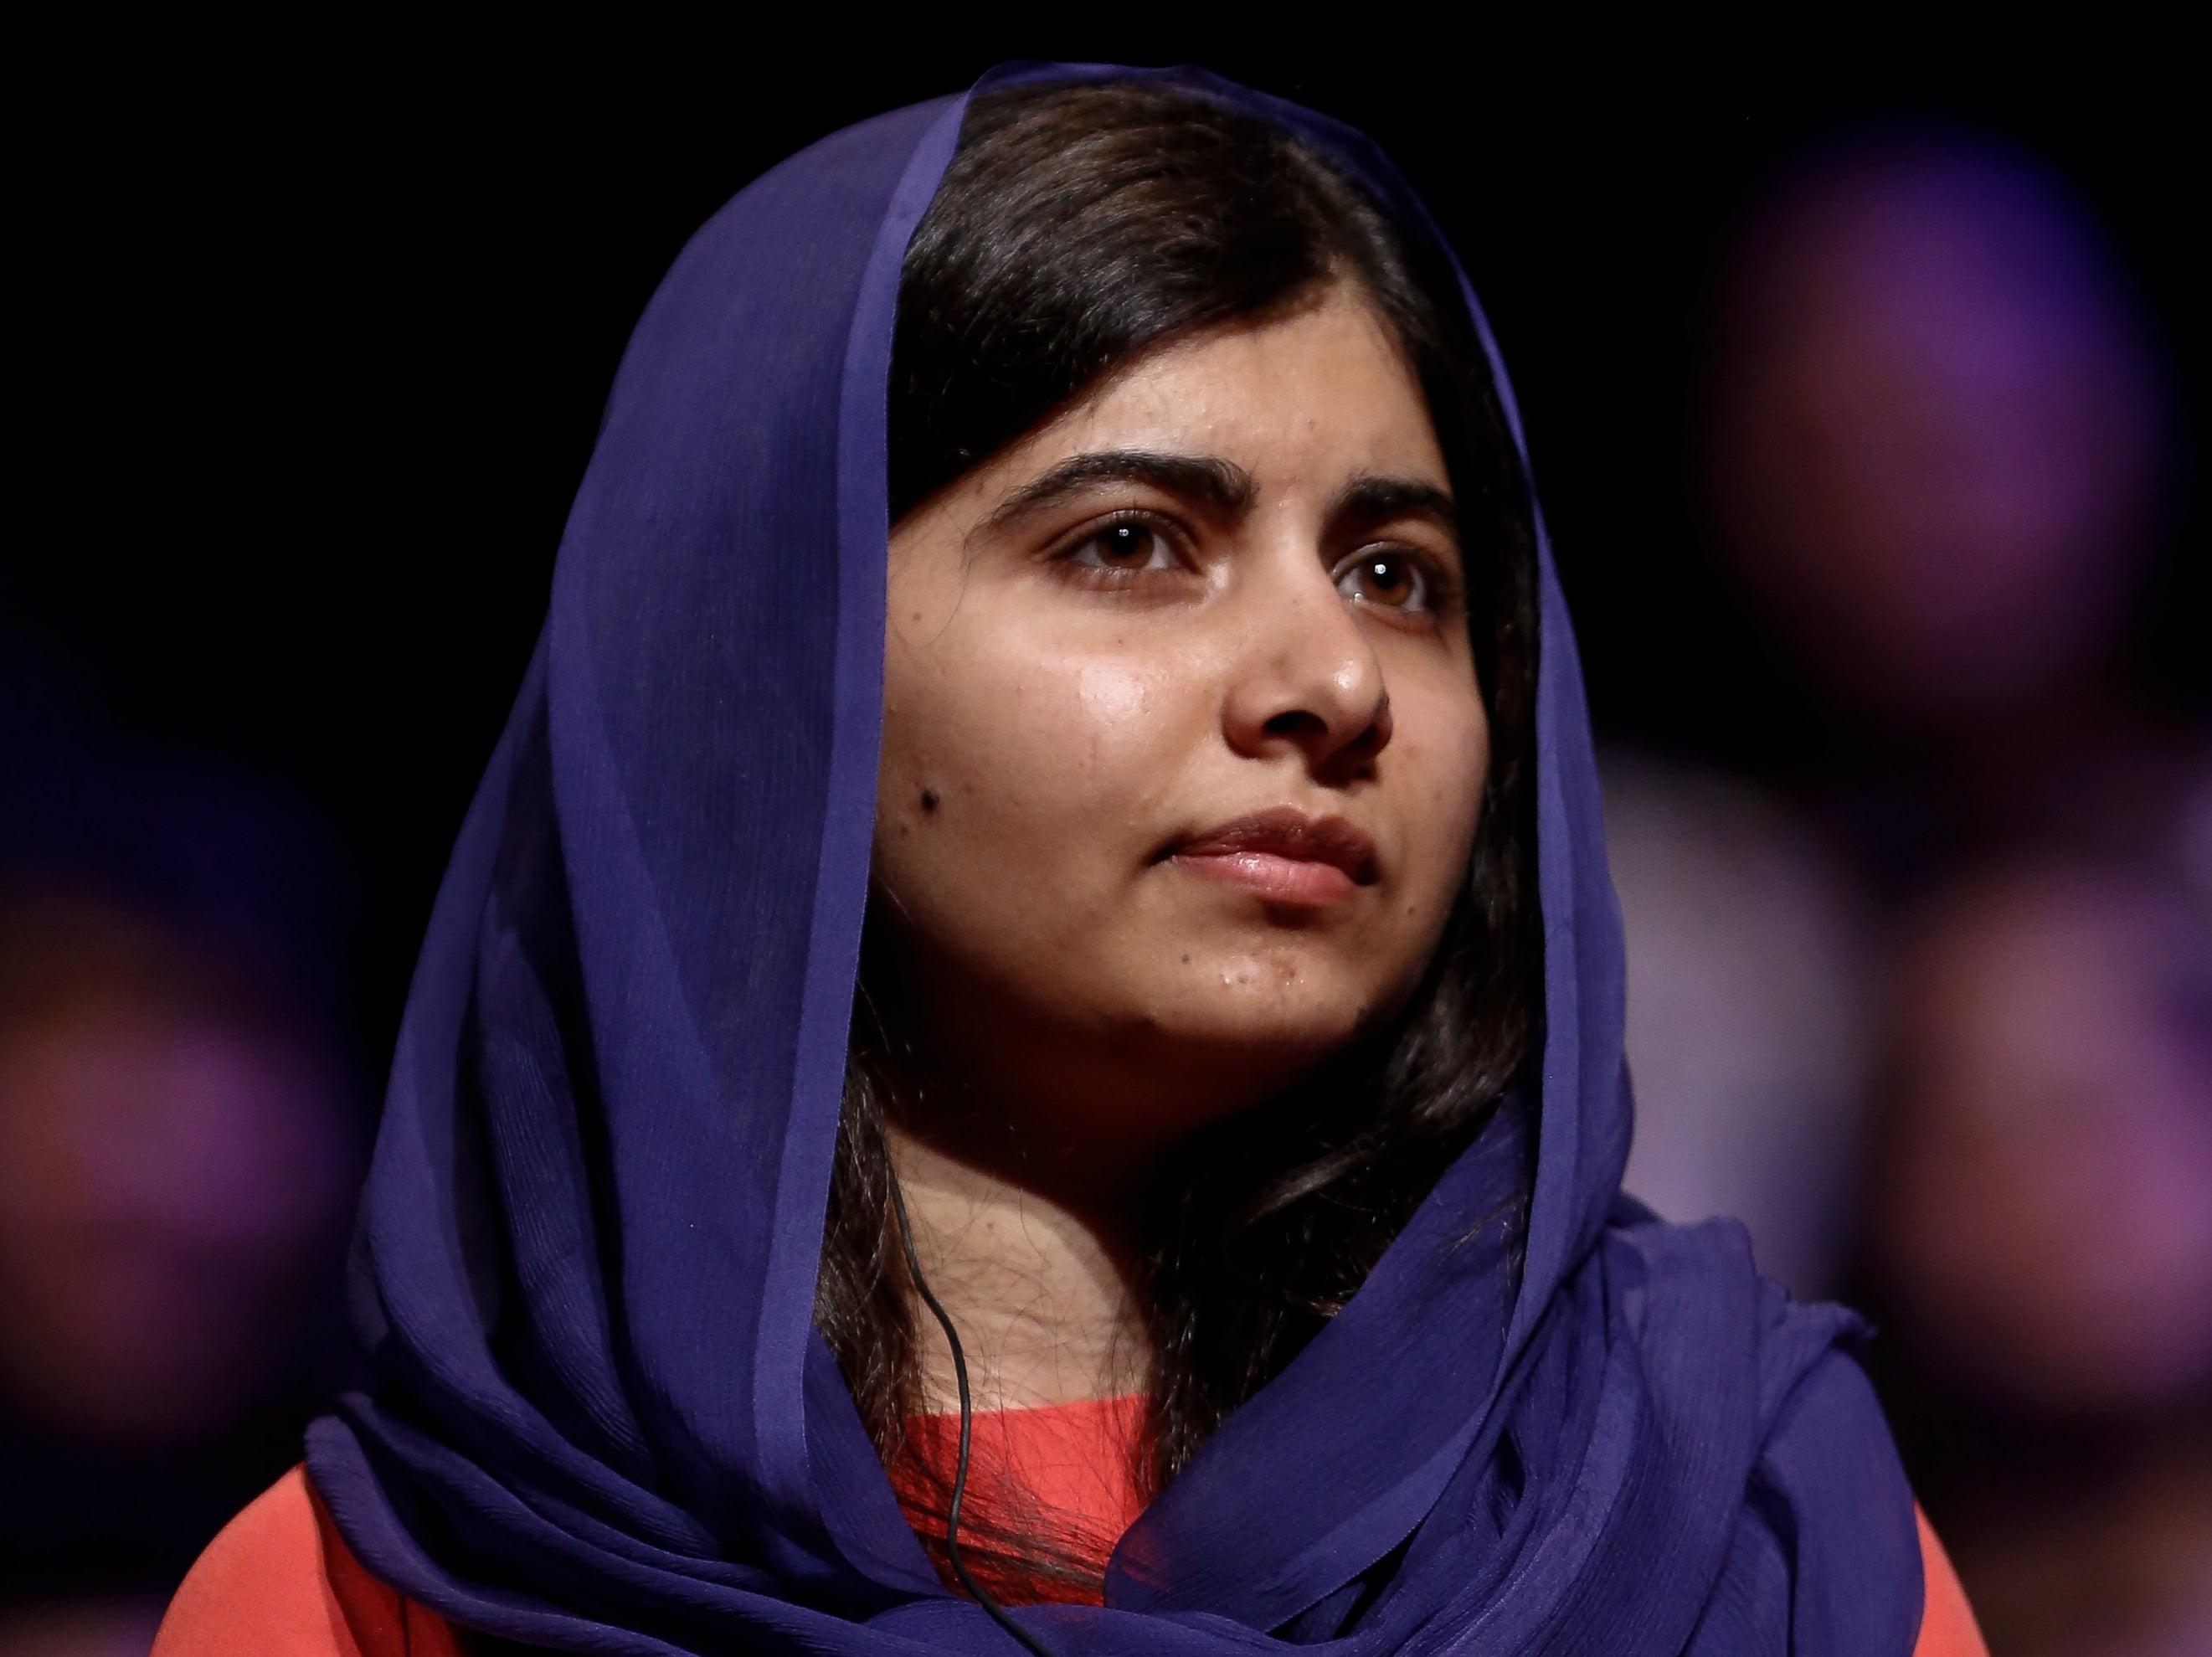 Malala Yousafzai attends an event about the importance of education and women empowerment in Sao Paulo, Brazil